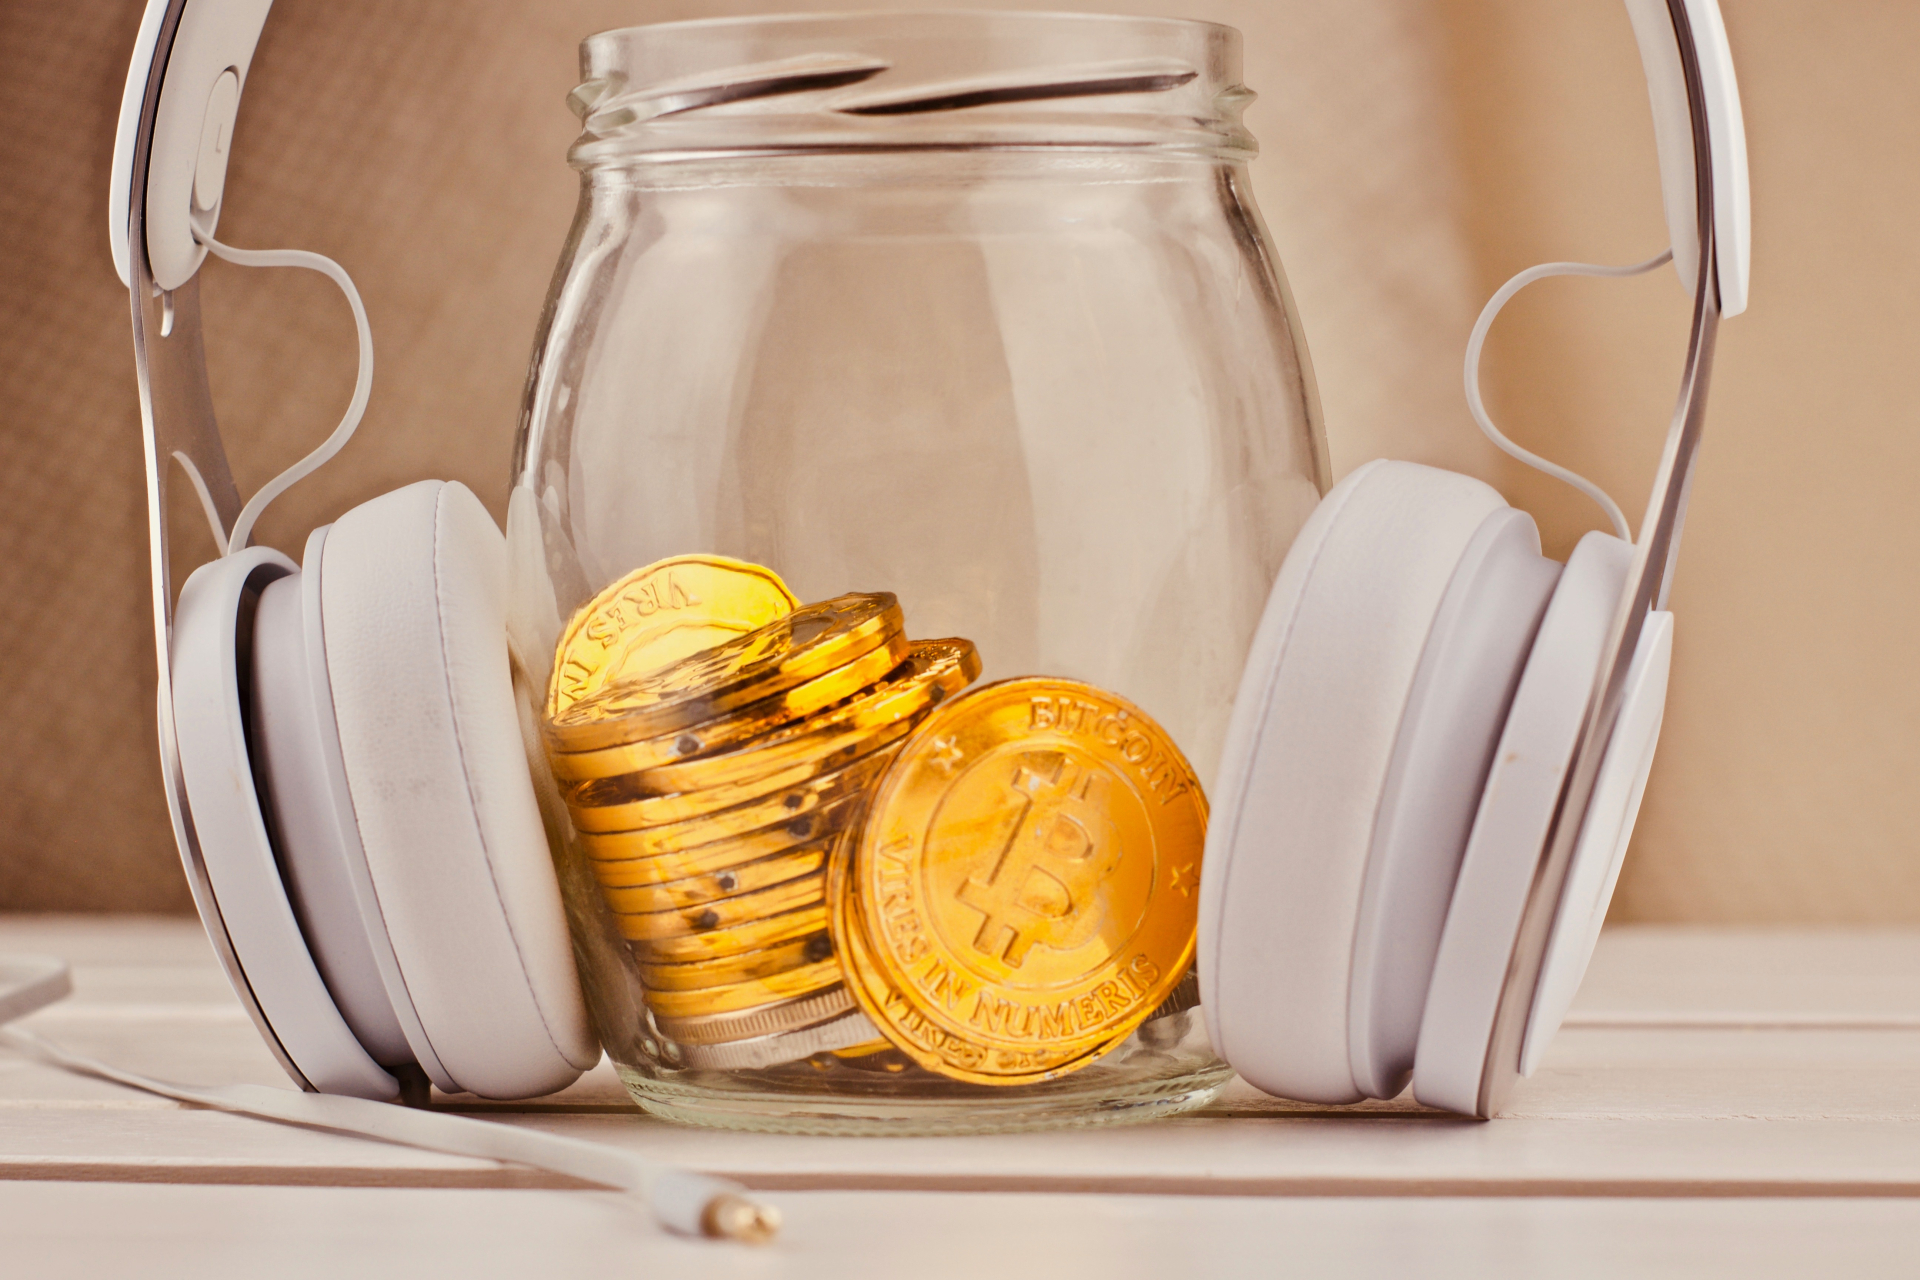 Earn Bitcoin by listening to podcasts
